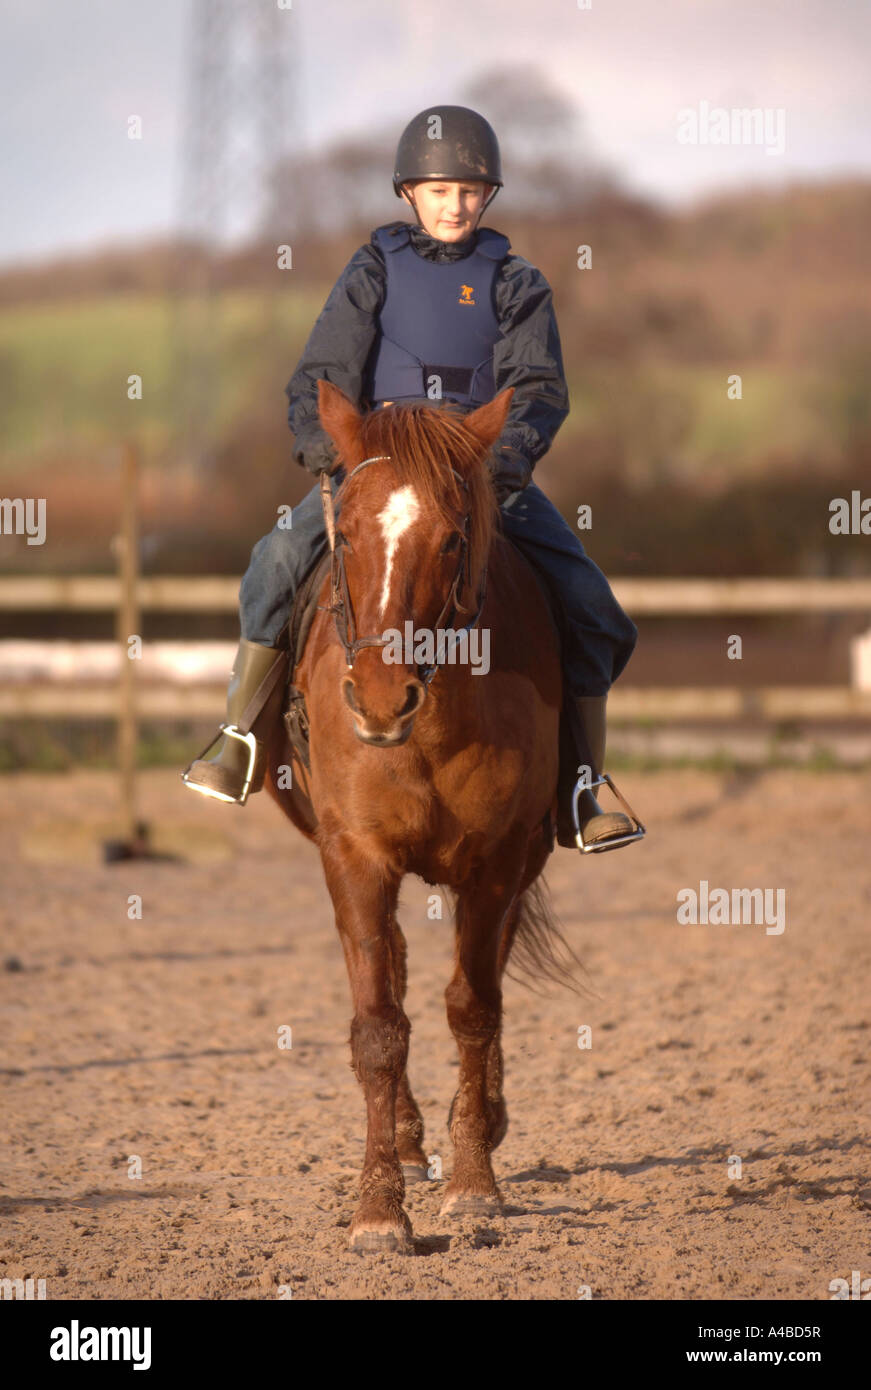 A SCHOOL CHILD LEARNING TO RIDE AT A RIDING SCHOOL SOMERSET UK Stock Photo